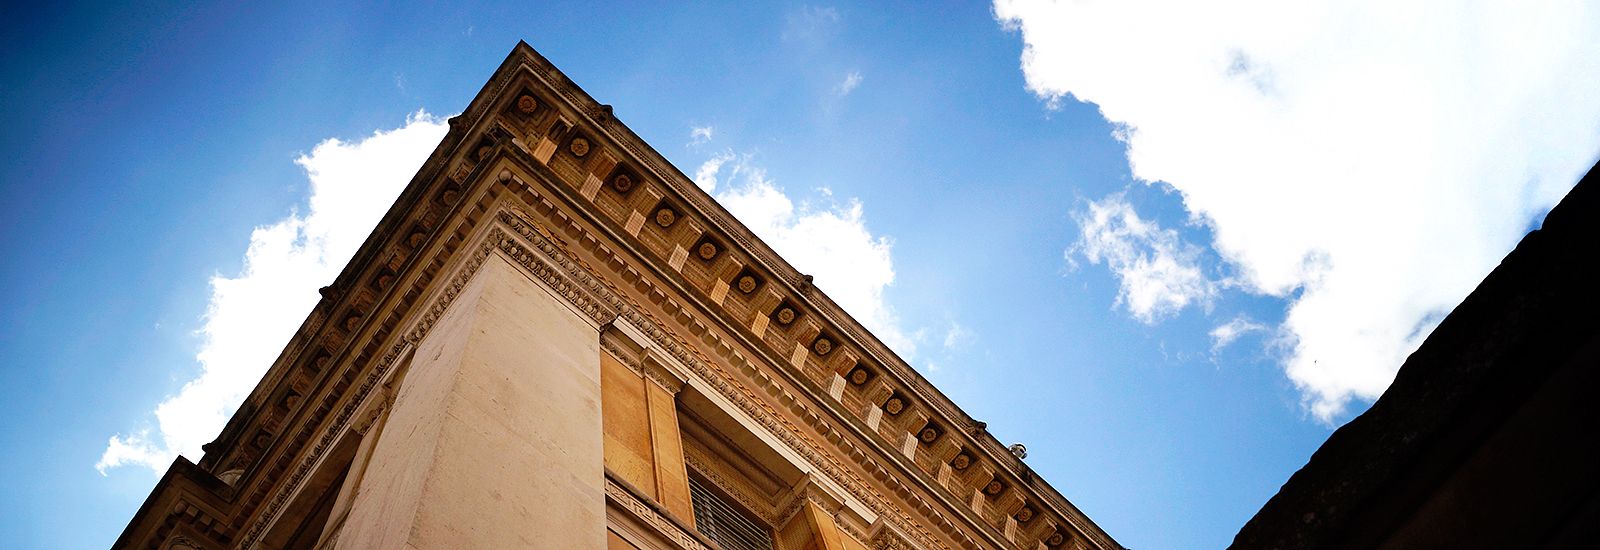 The exterior of the Ashmolean Museum